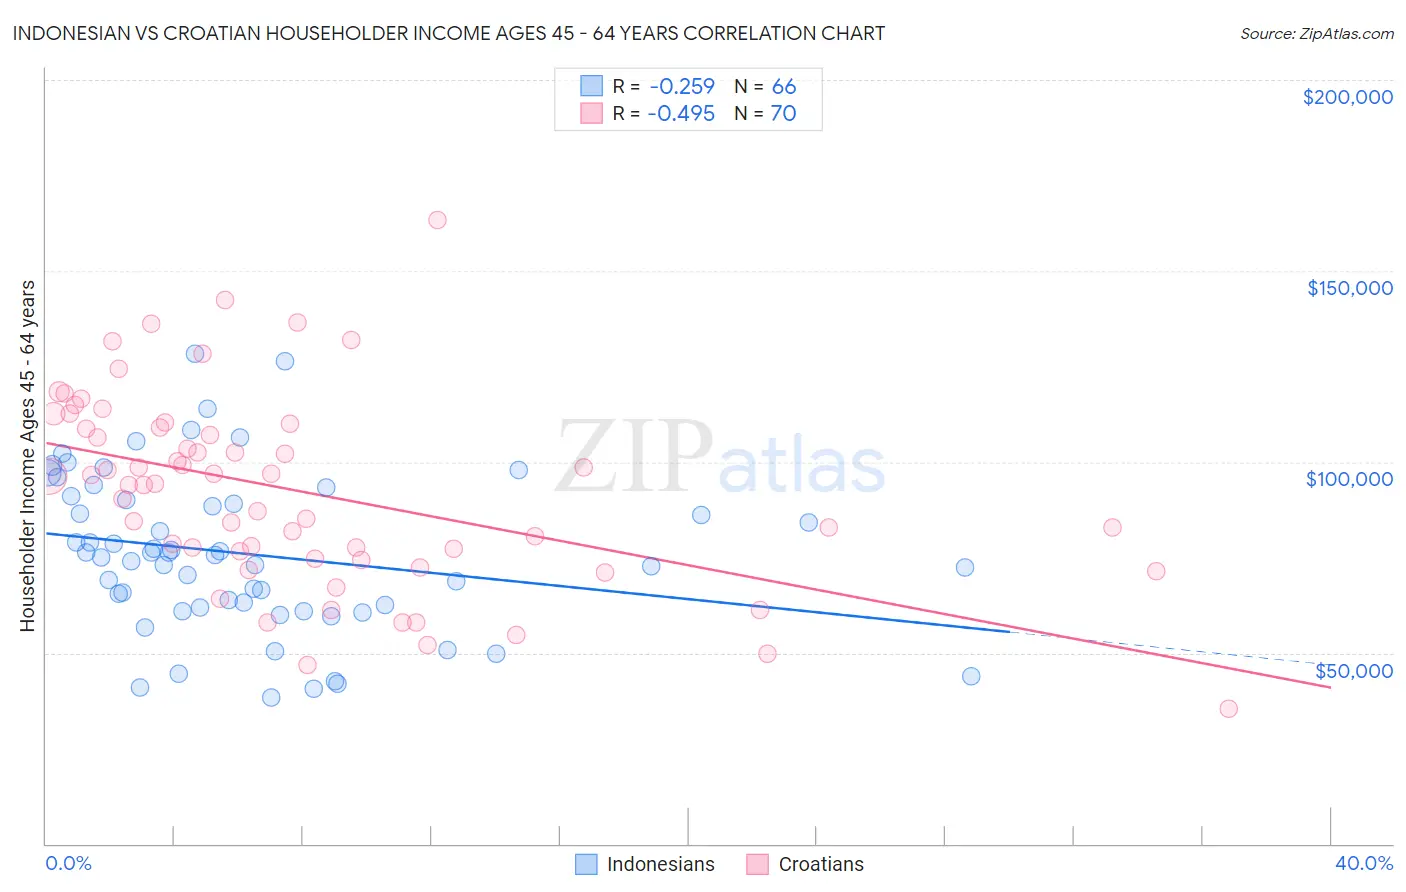 Indonesian vs Croatian Householder Income Ages 45 - 64 years